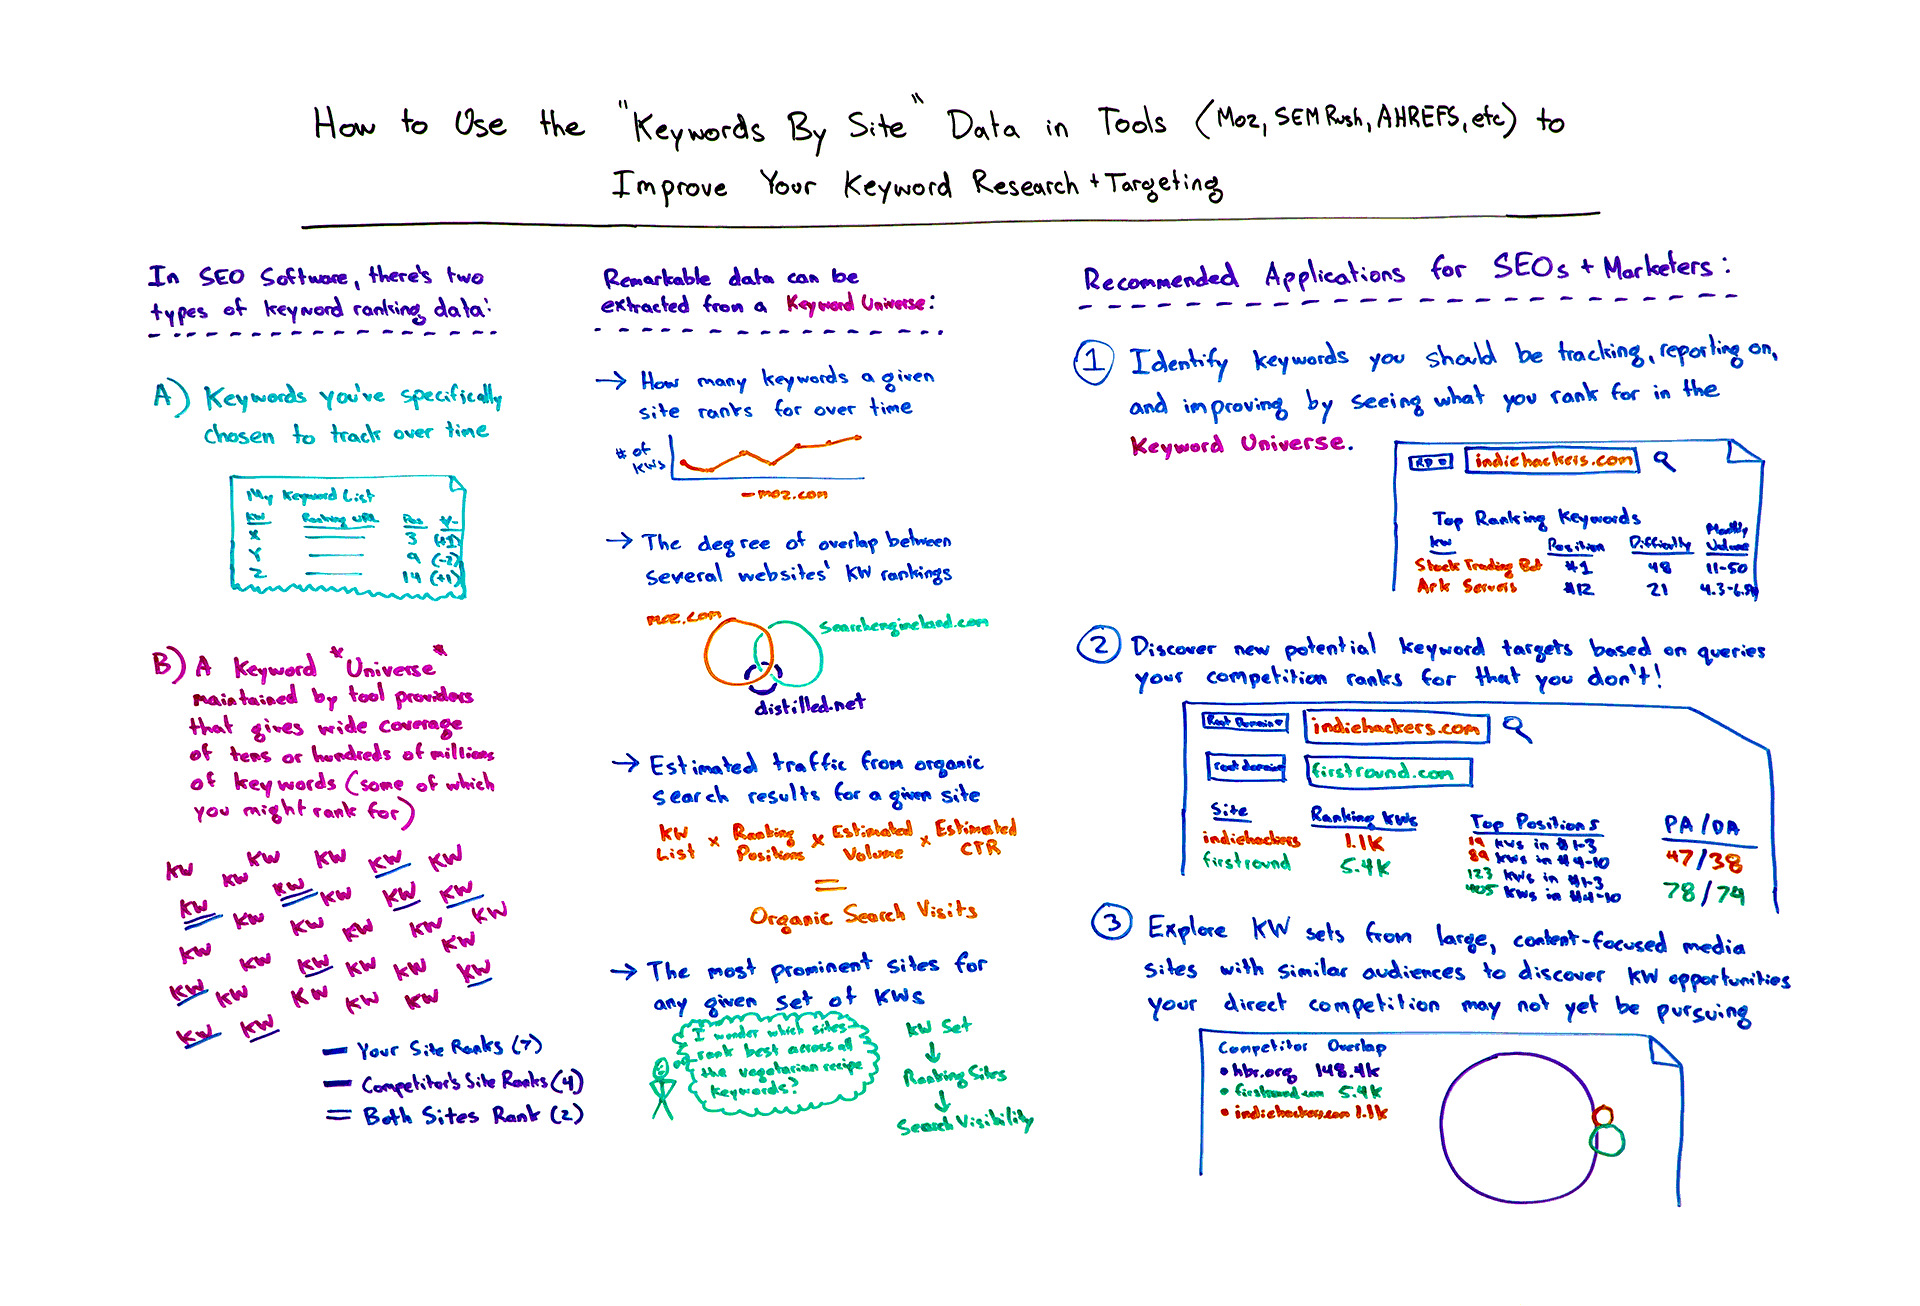 How to Use the "Keywords by Site" Data in Tools (Moz, SEMrush, Ahrefs, etc.) to Improve Your Keyword Research and Targeting - Whiteboard Friday